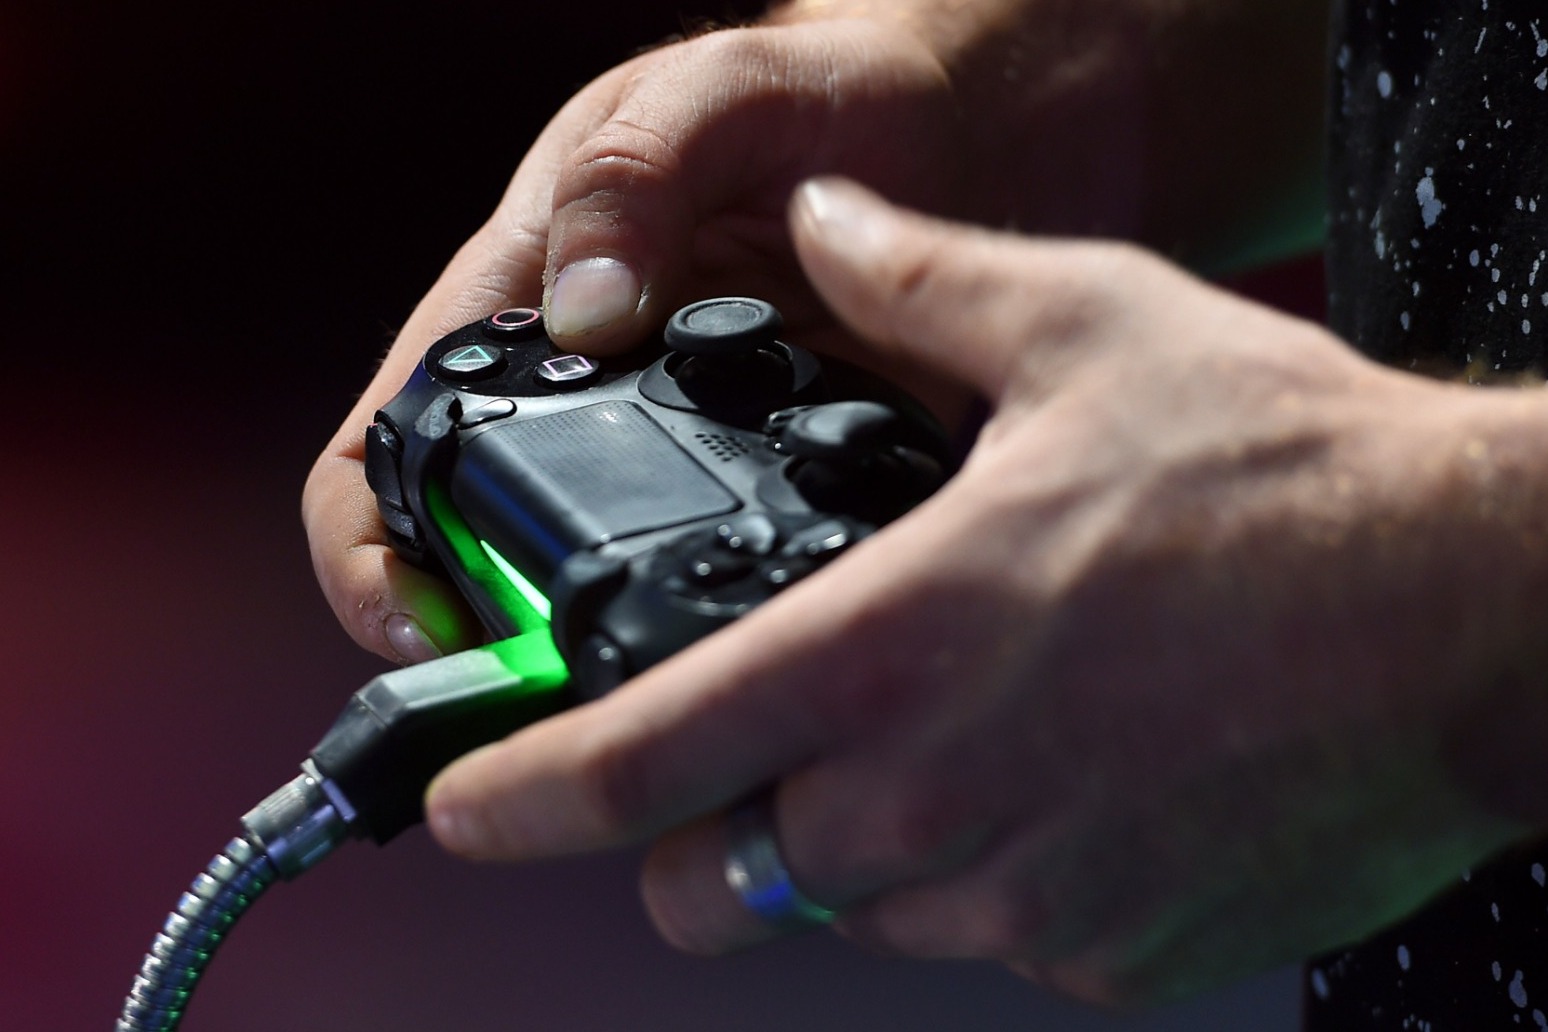 Mental health boss warns video games are setting children up for addiction 